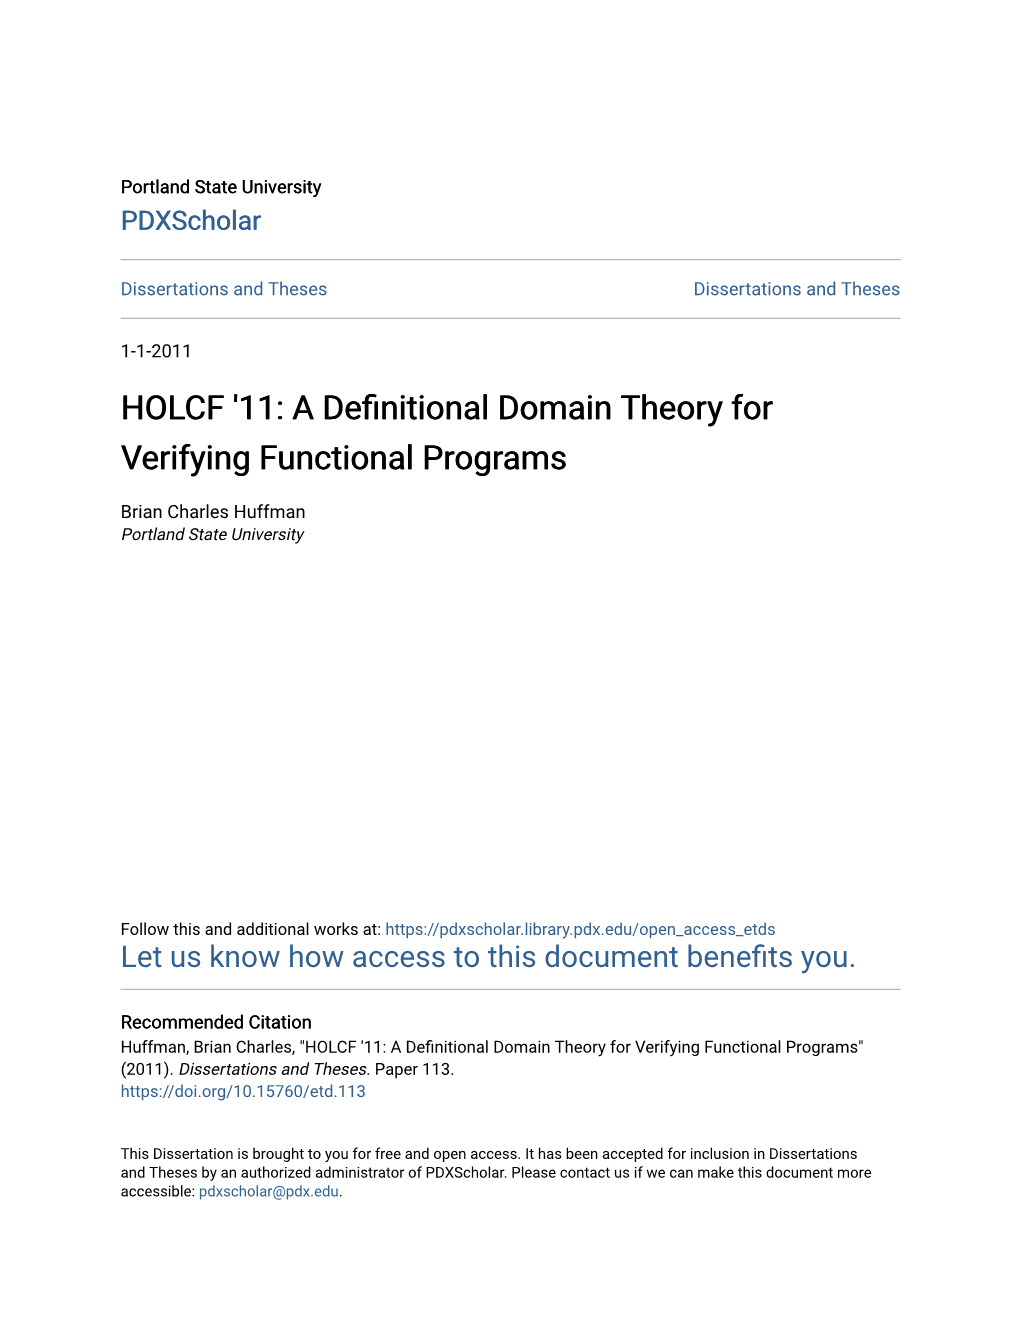 11: a Definitional Domain Theory for Verifying Functional Programs